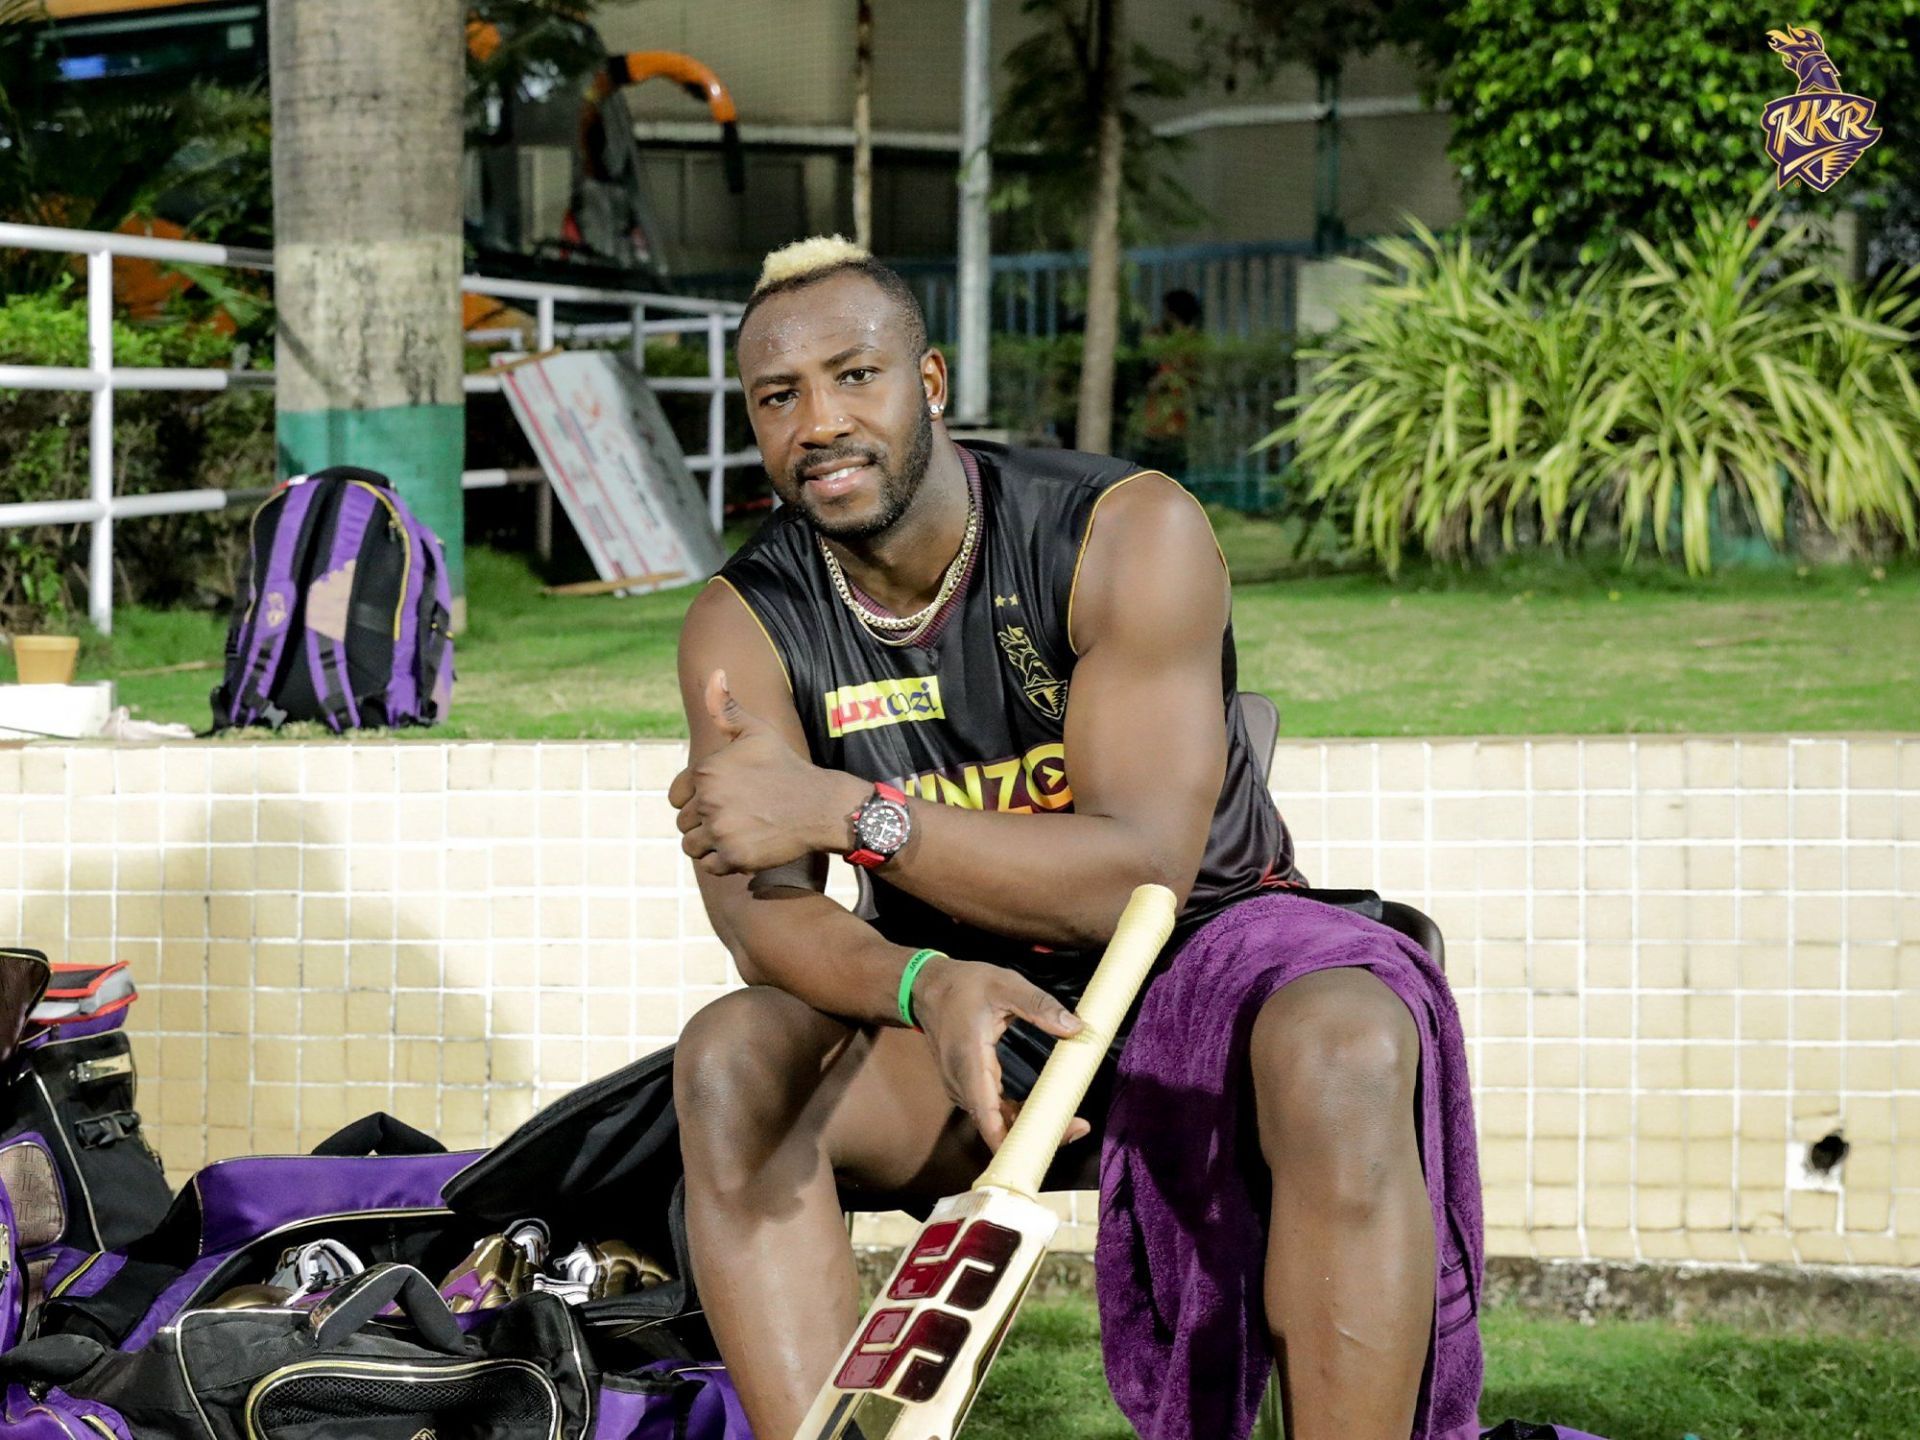 Andre Russell will play an important role for KKR in IPL 2022 (Credit: Twitter/KKR)